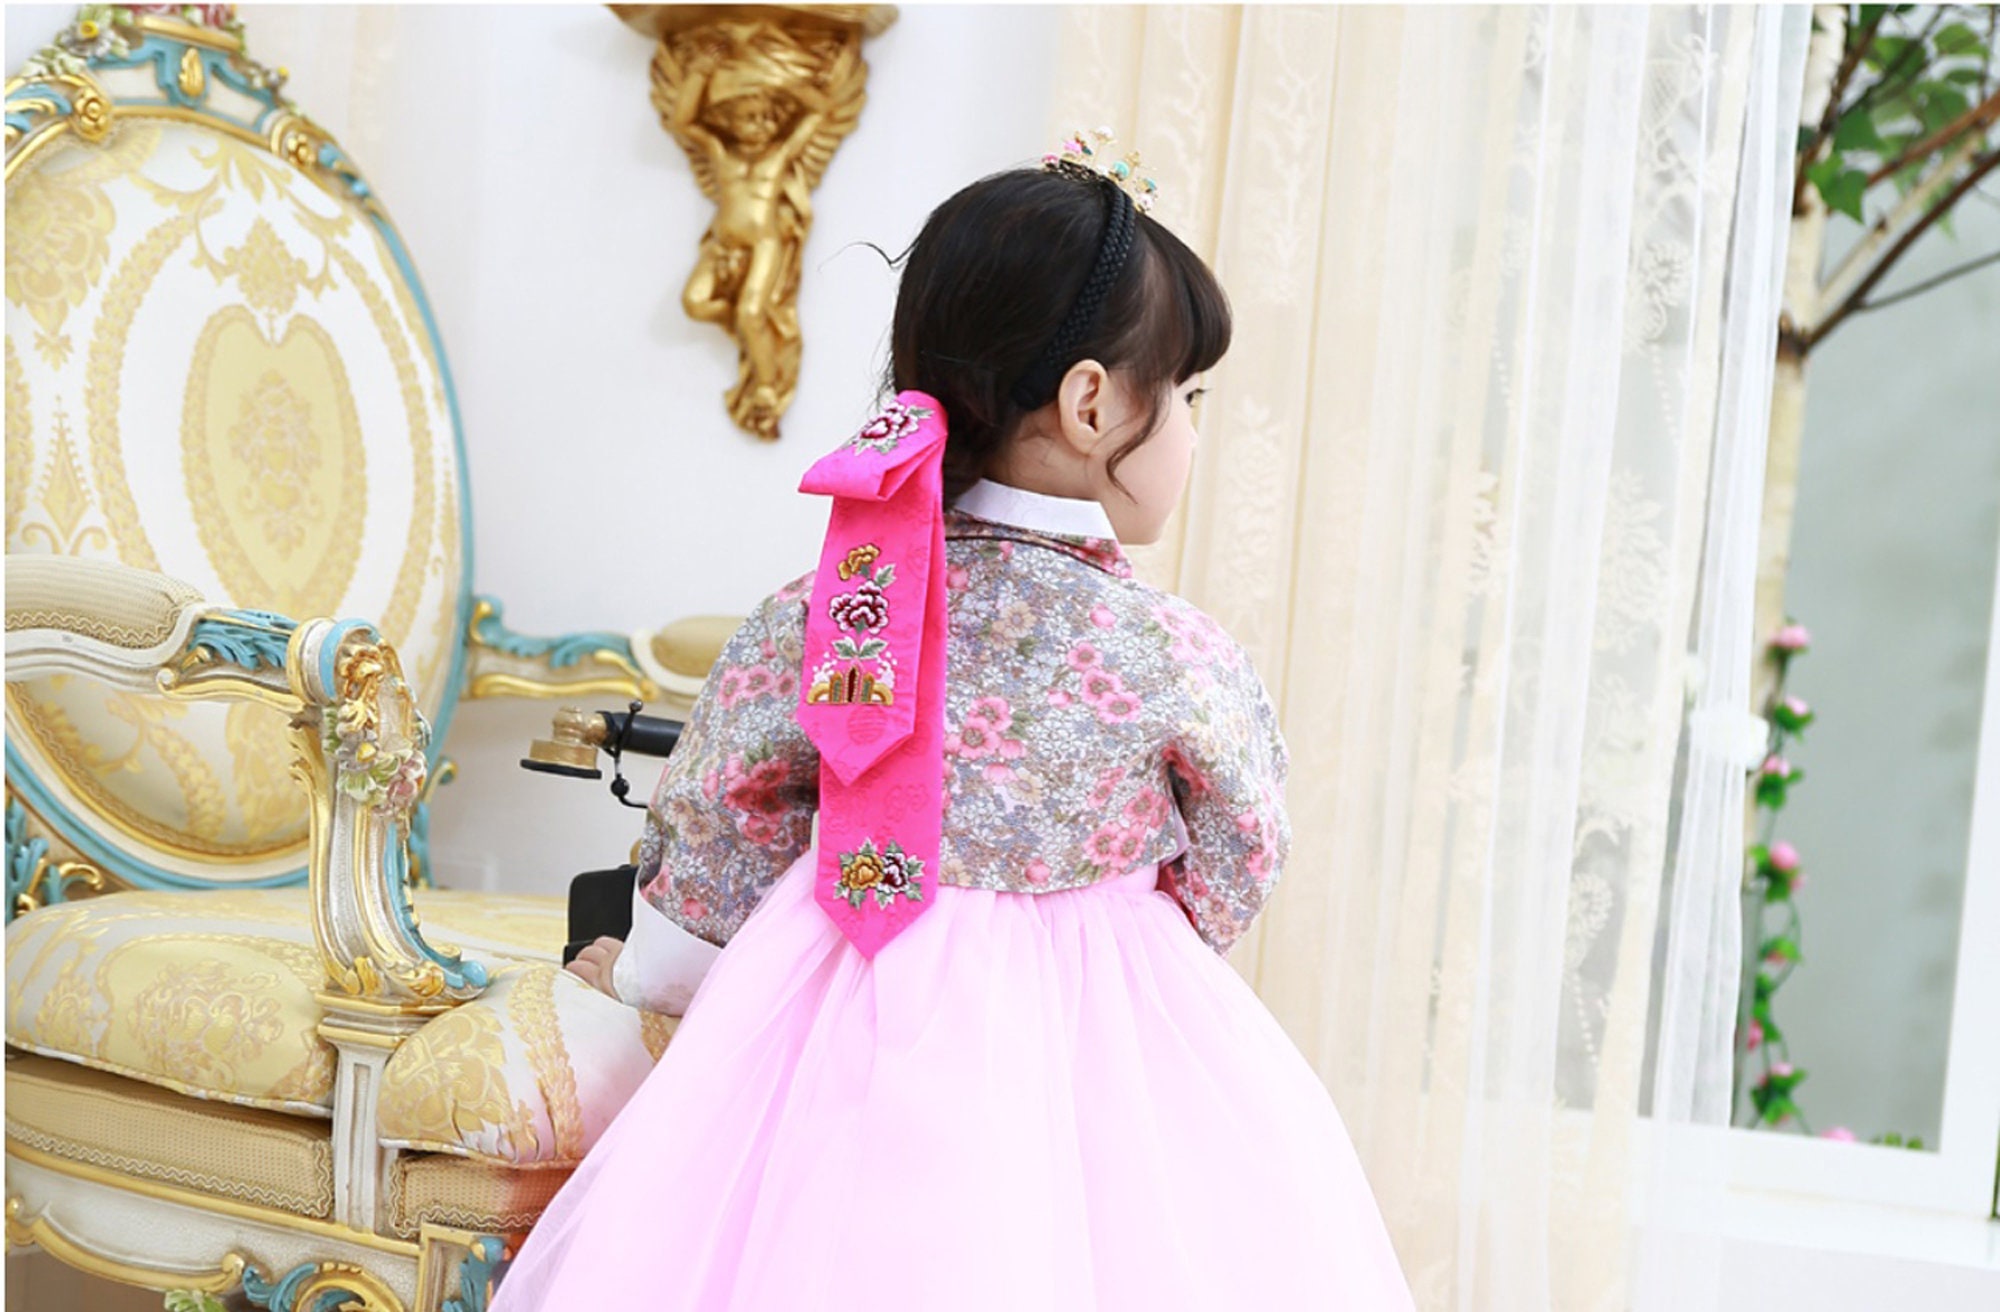 Hairband Accessory Korean Traditional Hanbok New Year Party Baby Toddler Girl 